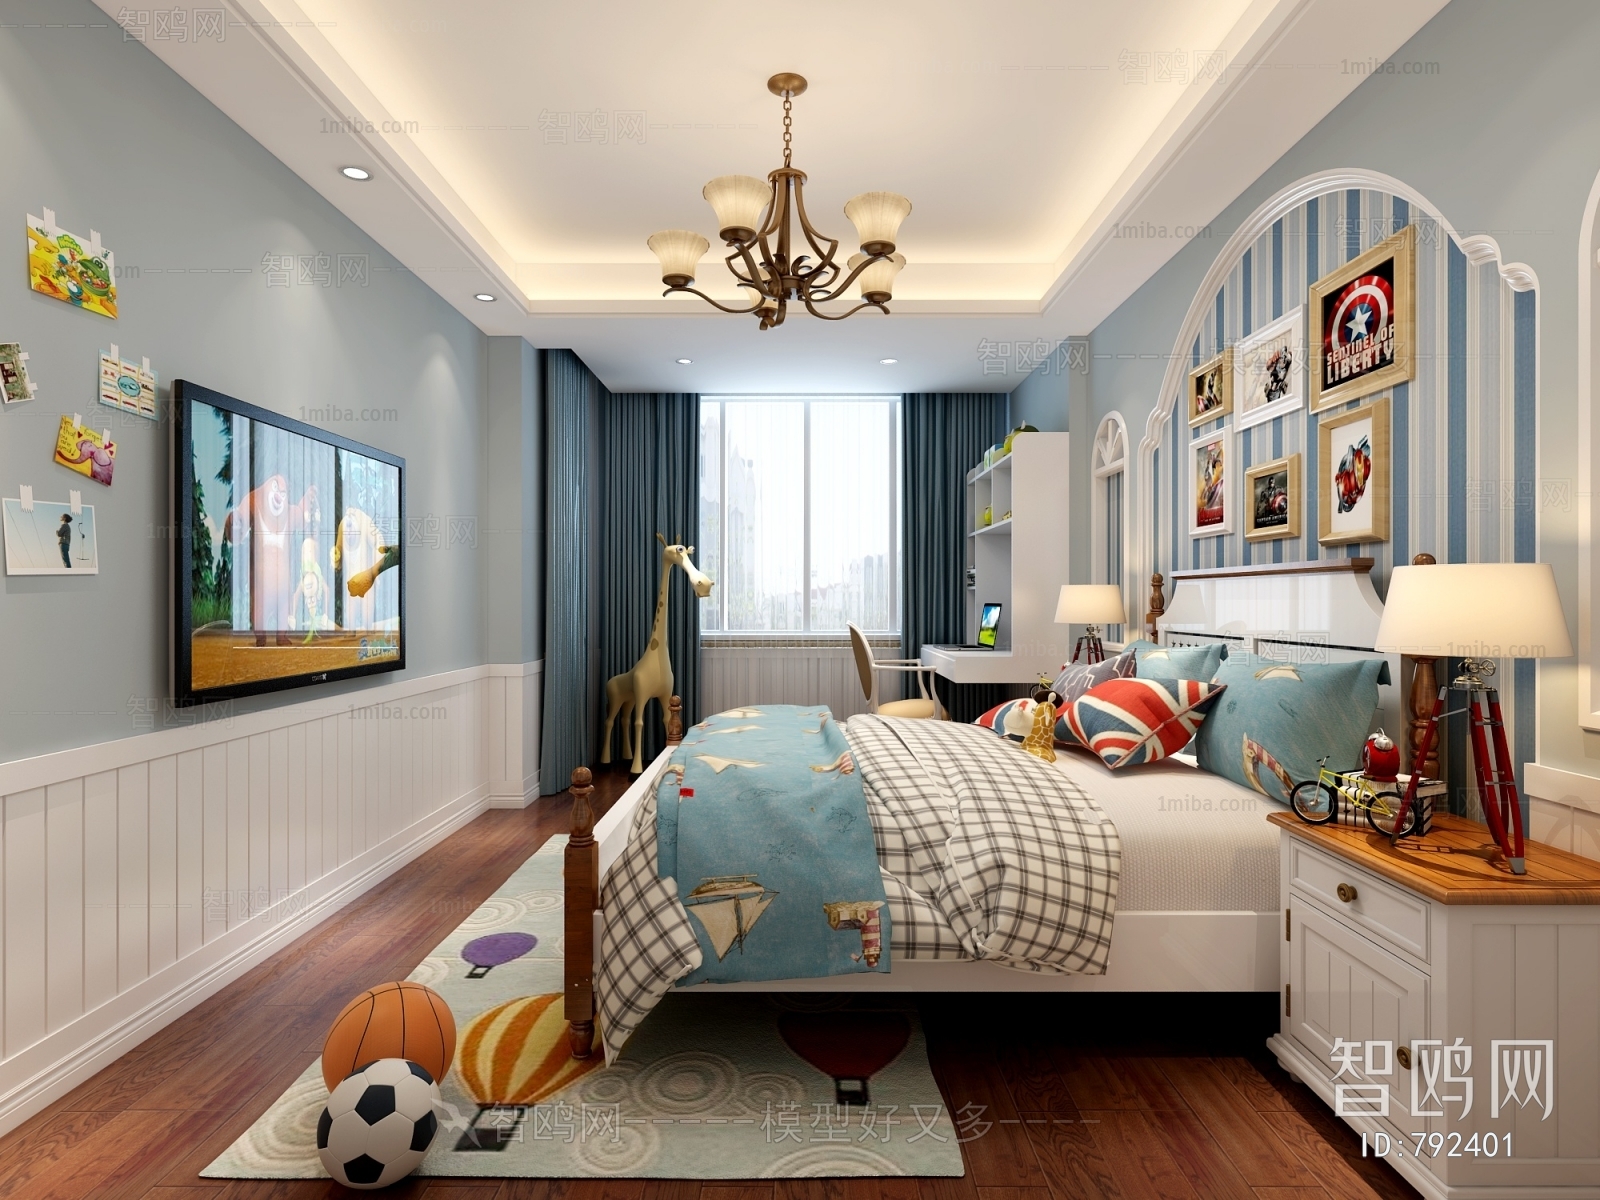 Mediterranean Style Boy's Room And Son's Room